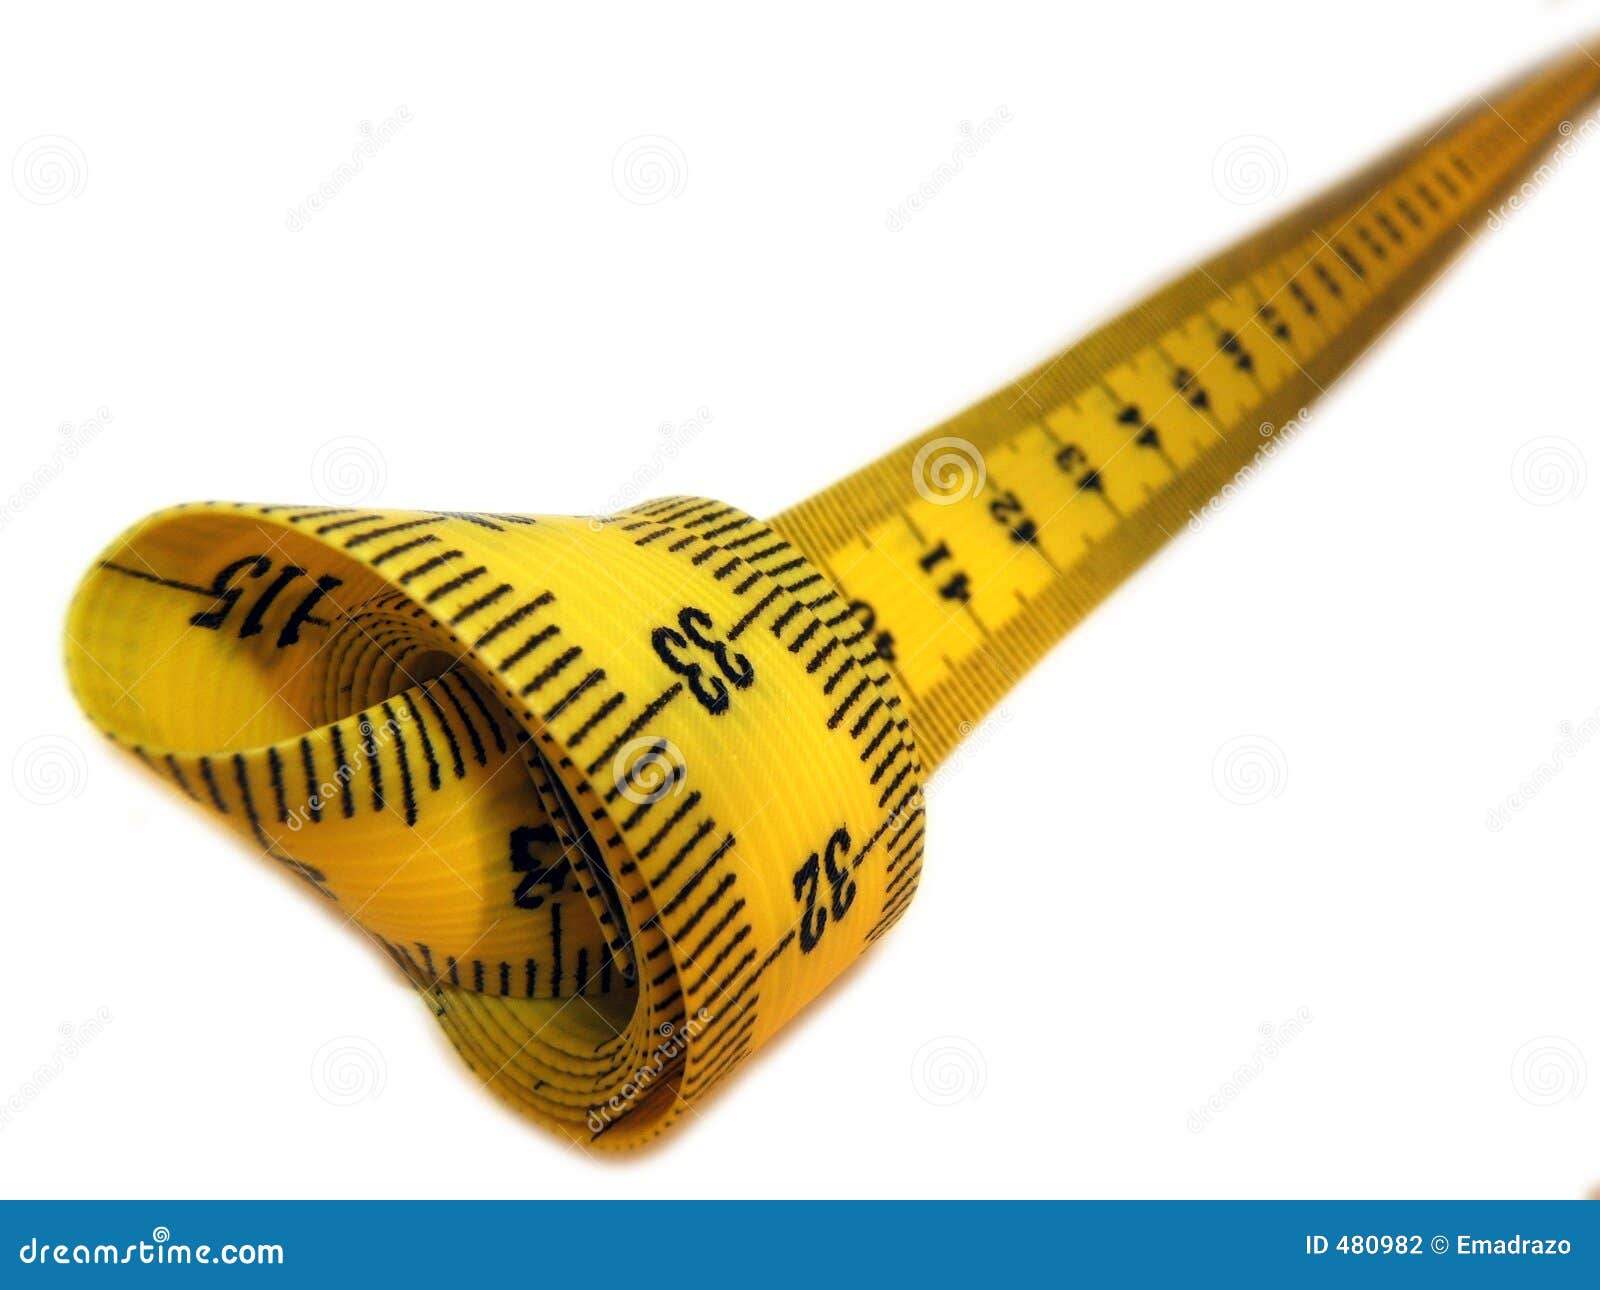 https://thumbs.dreamstime.com/z/isolated-measuring-tape-480982.jpg